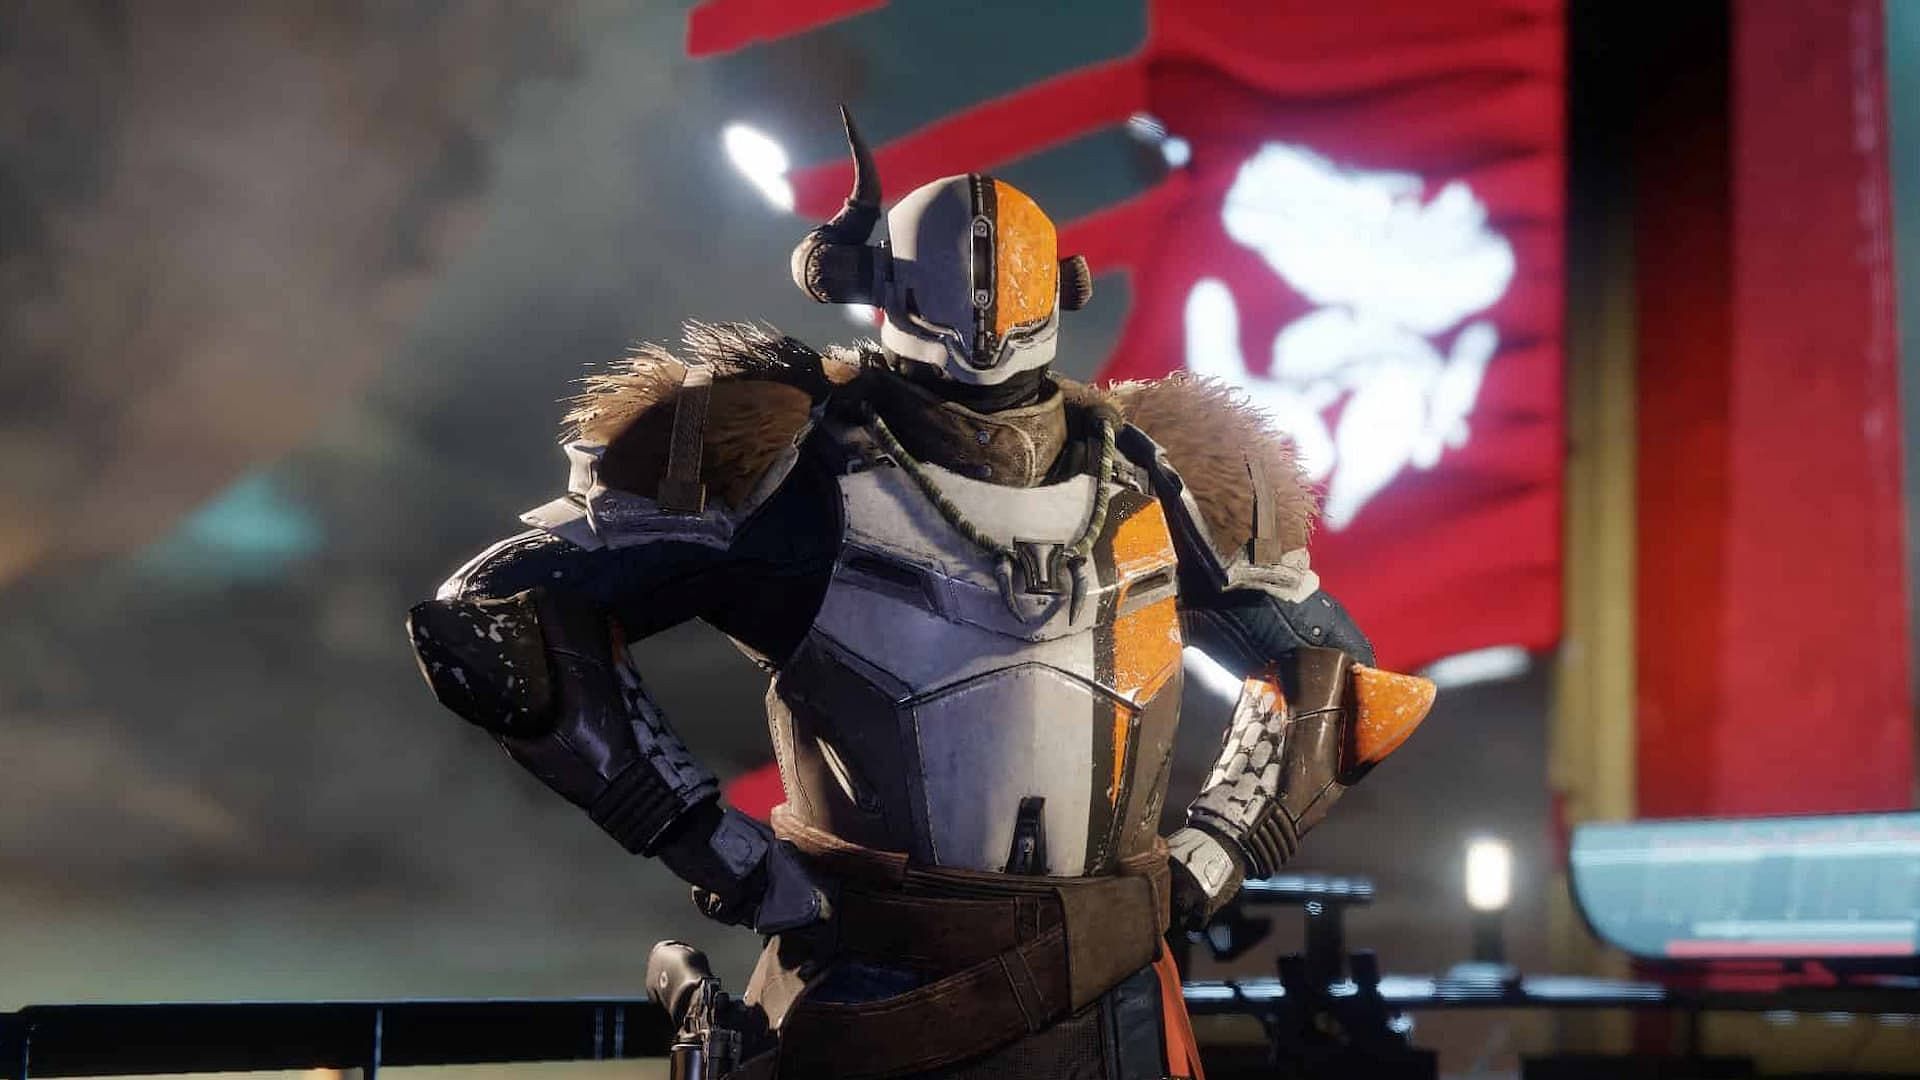 The Crucible in Destiny 2 is set to receive some major changes in Season 18 (Image via Bungie)